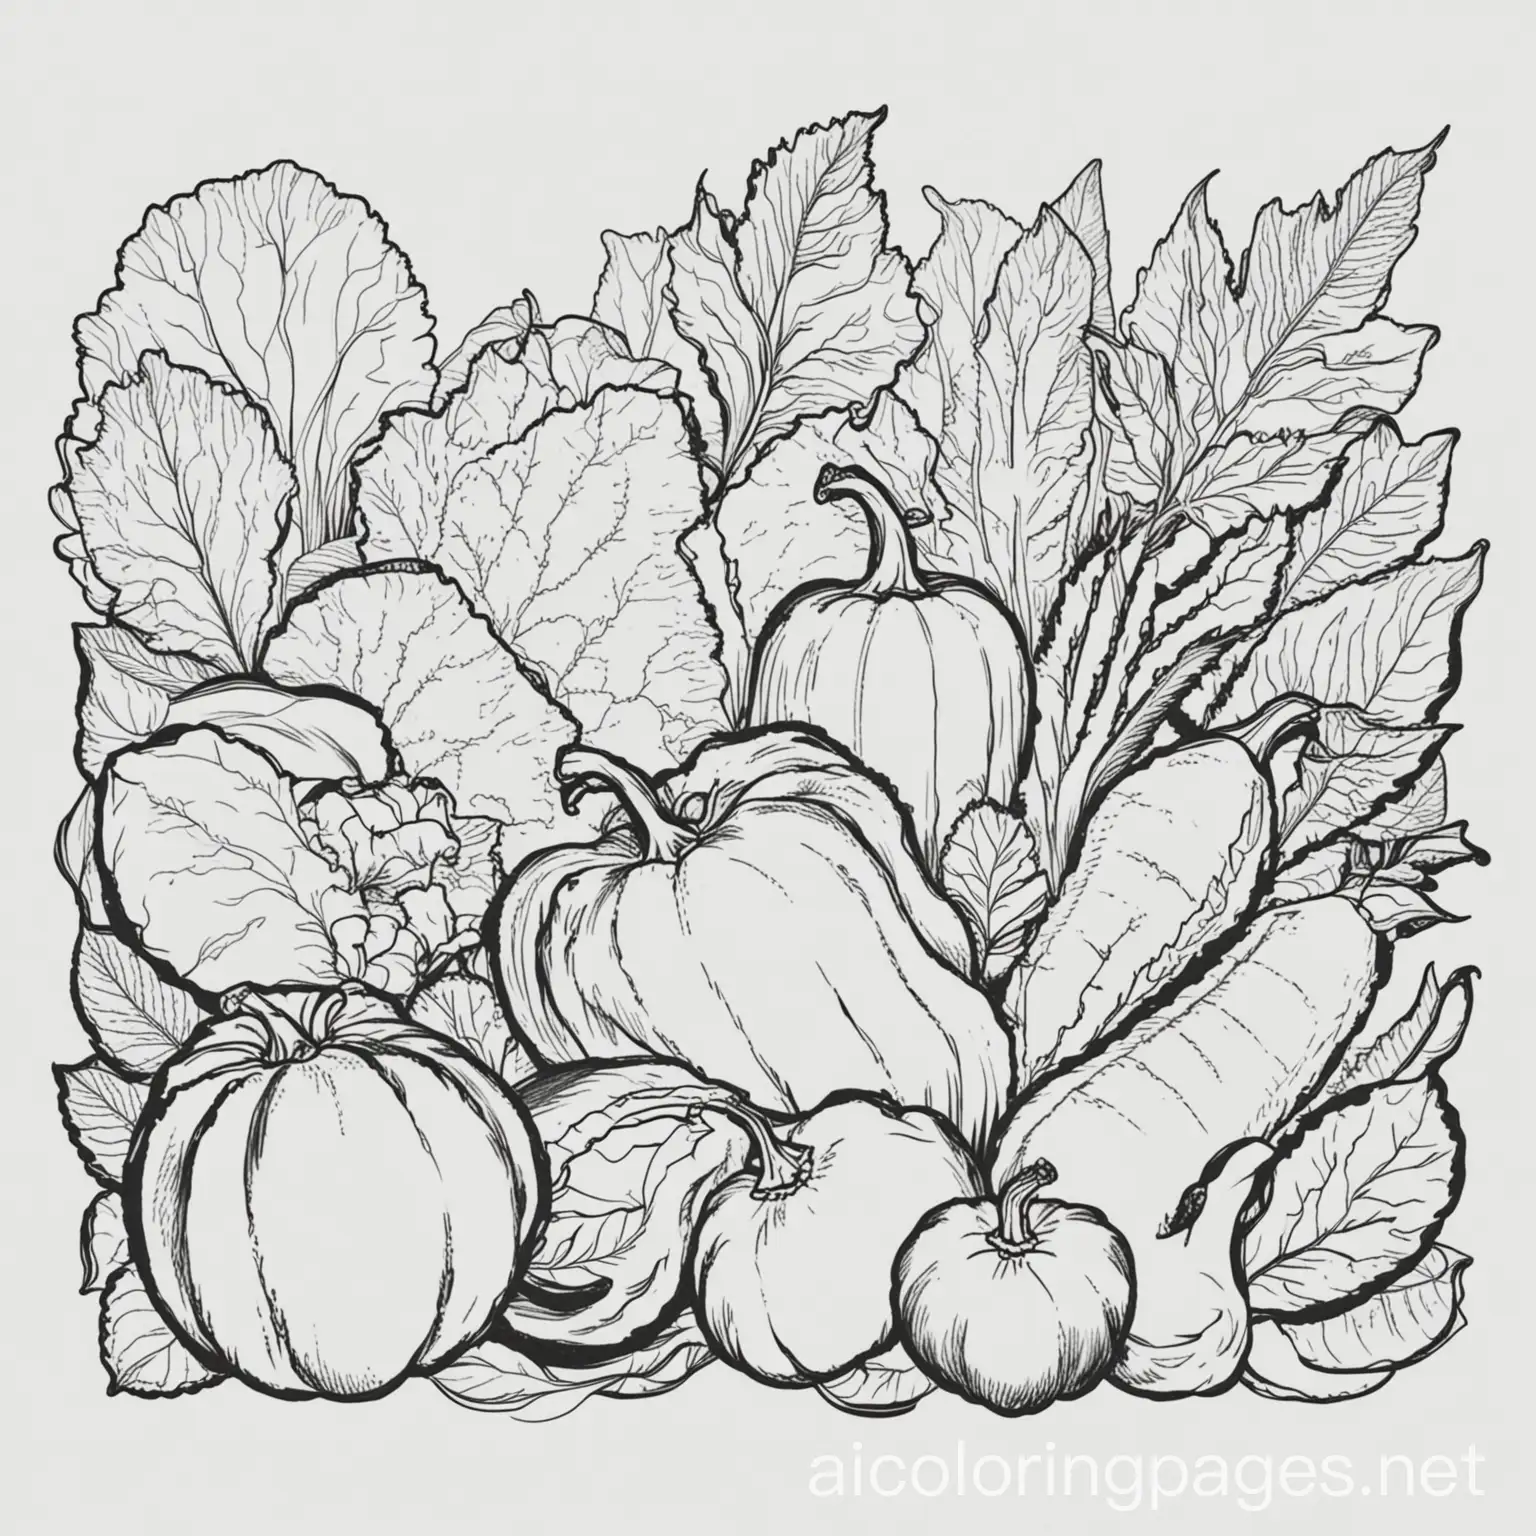 Harvest of vegetables , Coloring Page, black and white, line art, white background, Simplicity, Ample White Space. The background of the coloring page is plain white to make it easy for young children to color within the lines. The outlines of all the subjects are easy to distinguish, making it simple for kids to color without too much difficulty